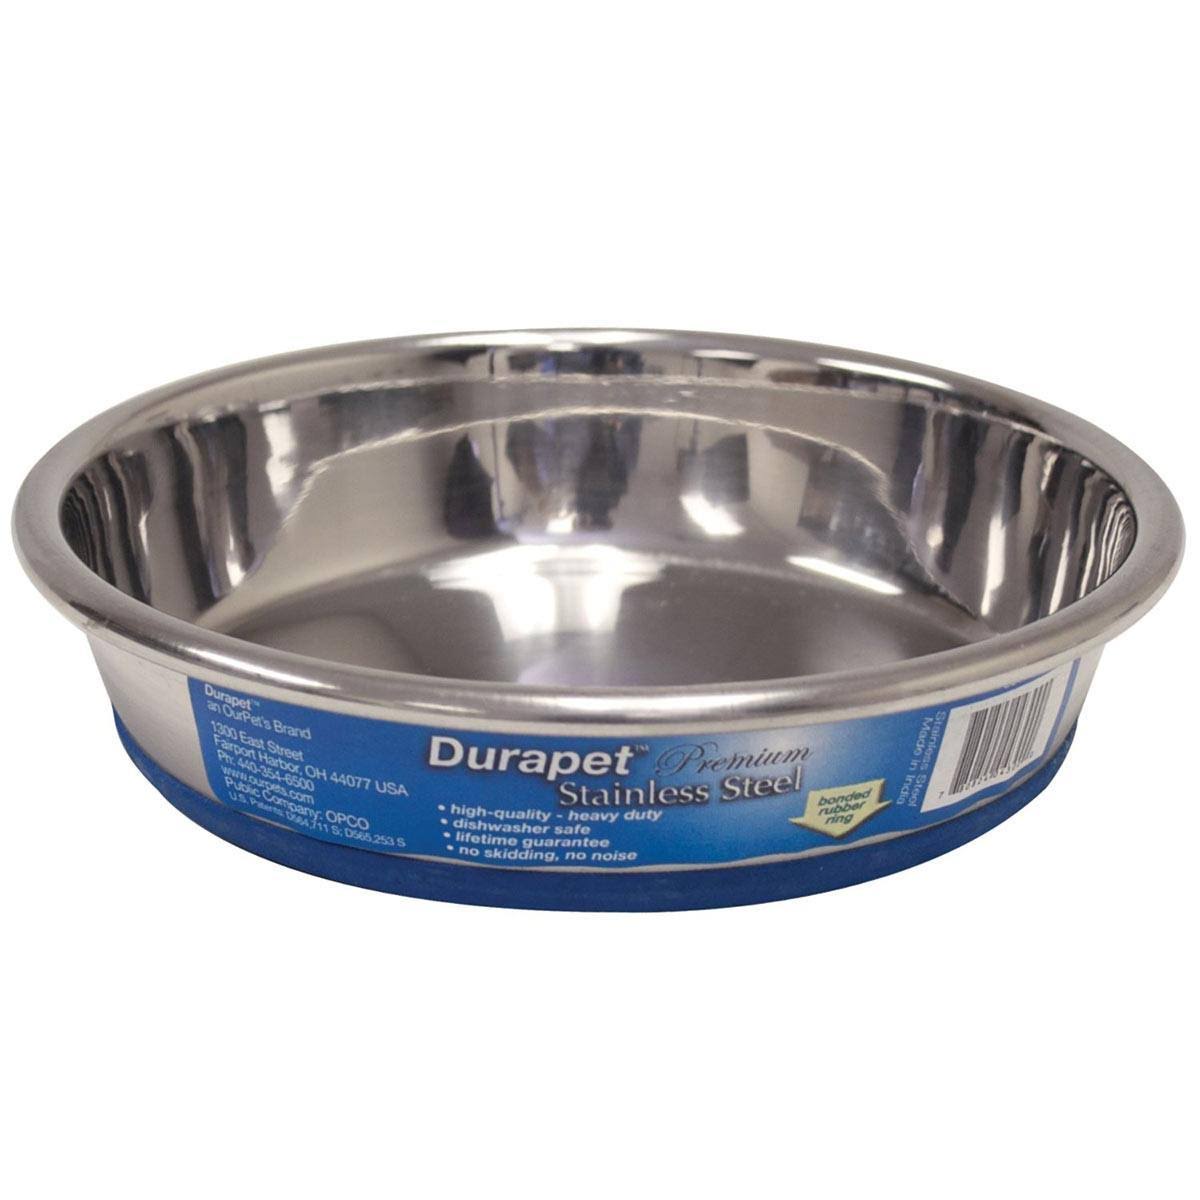 OurPet's Durapet Stainless Steel Bowl